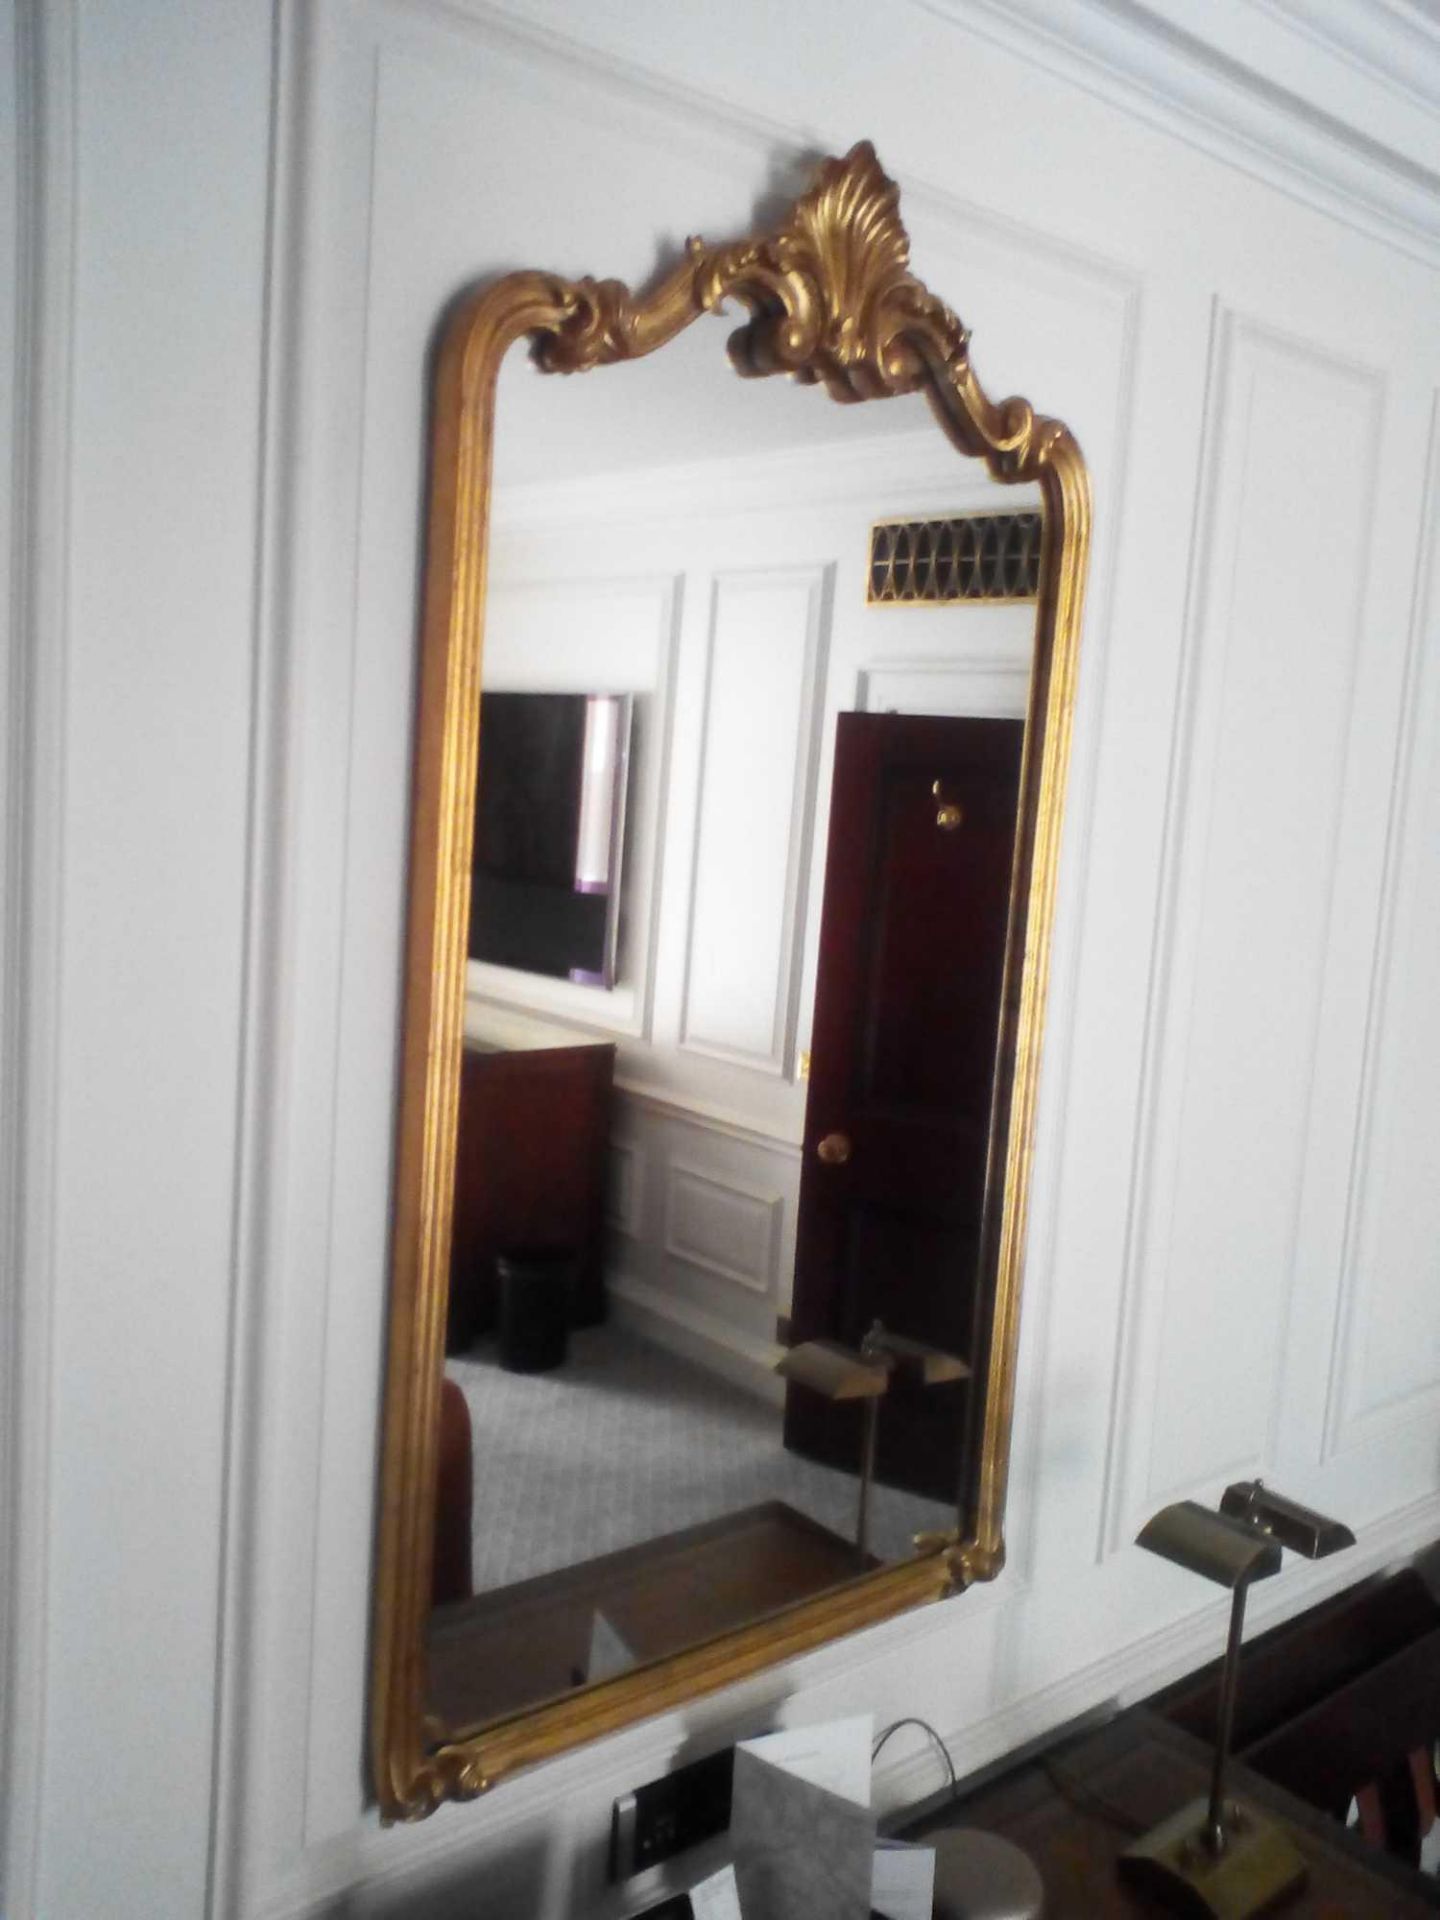 A Carved Gilt Rectangular Wall Mirror With Shell Crest Pediment 76 x 135cm (Room 103) - Image 2 of 2